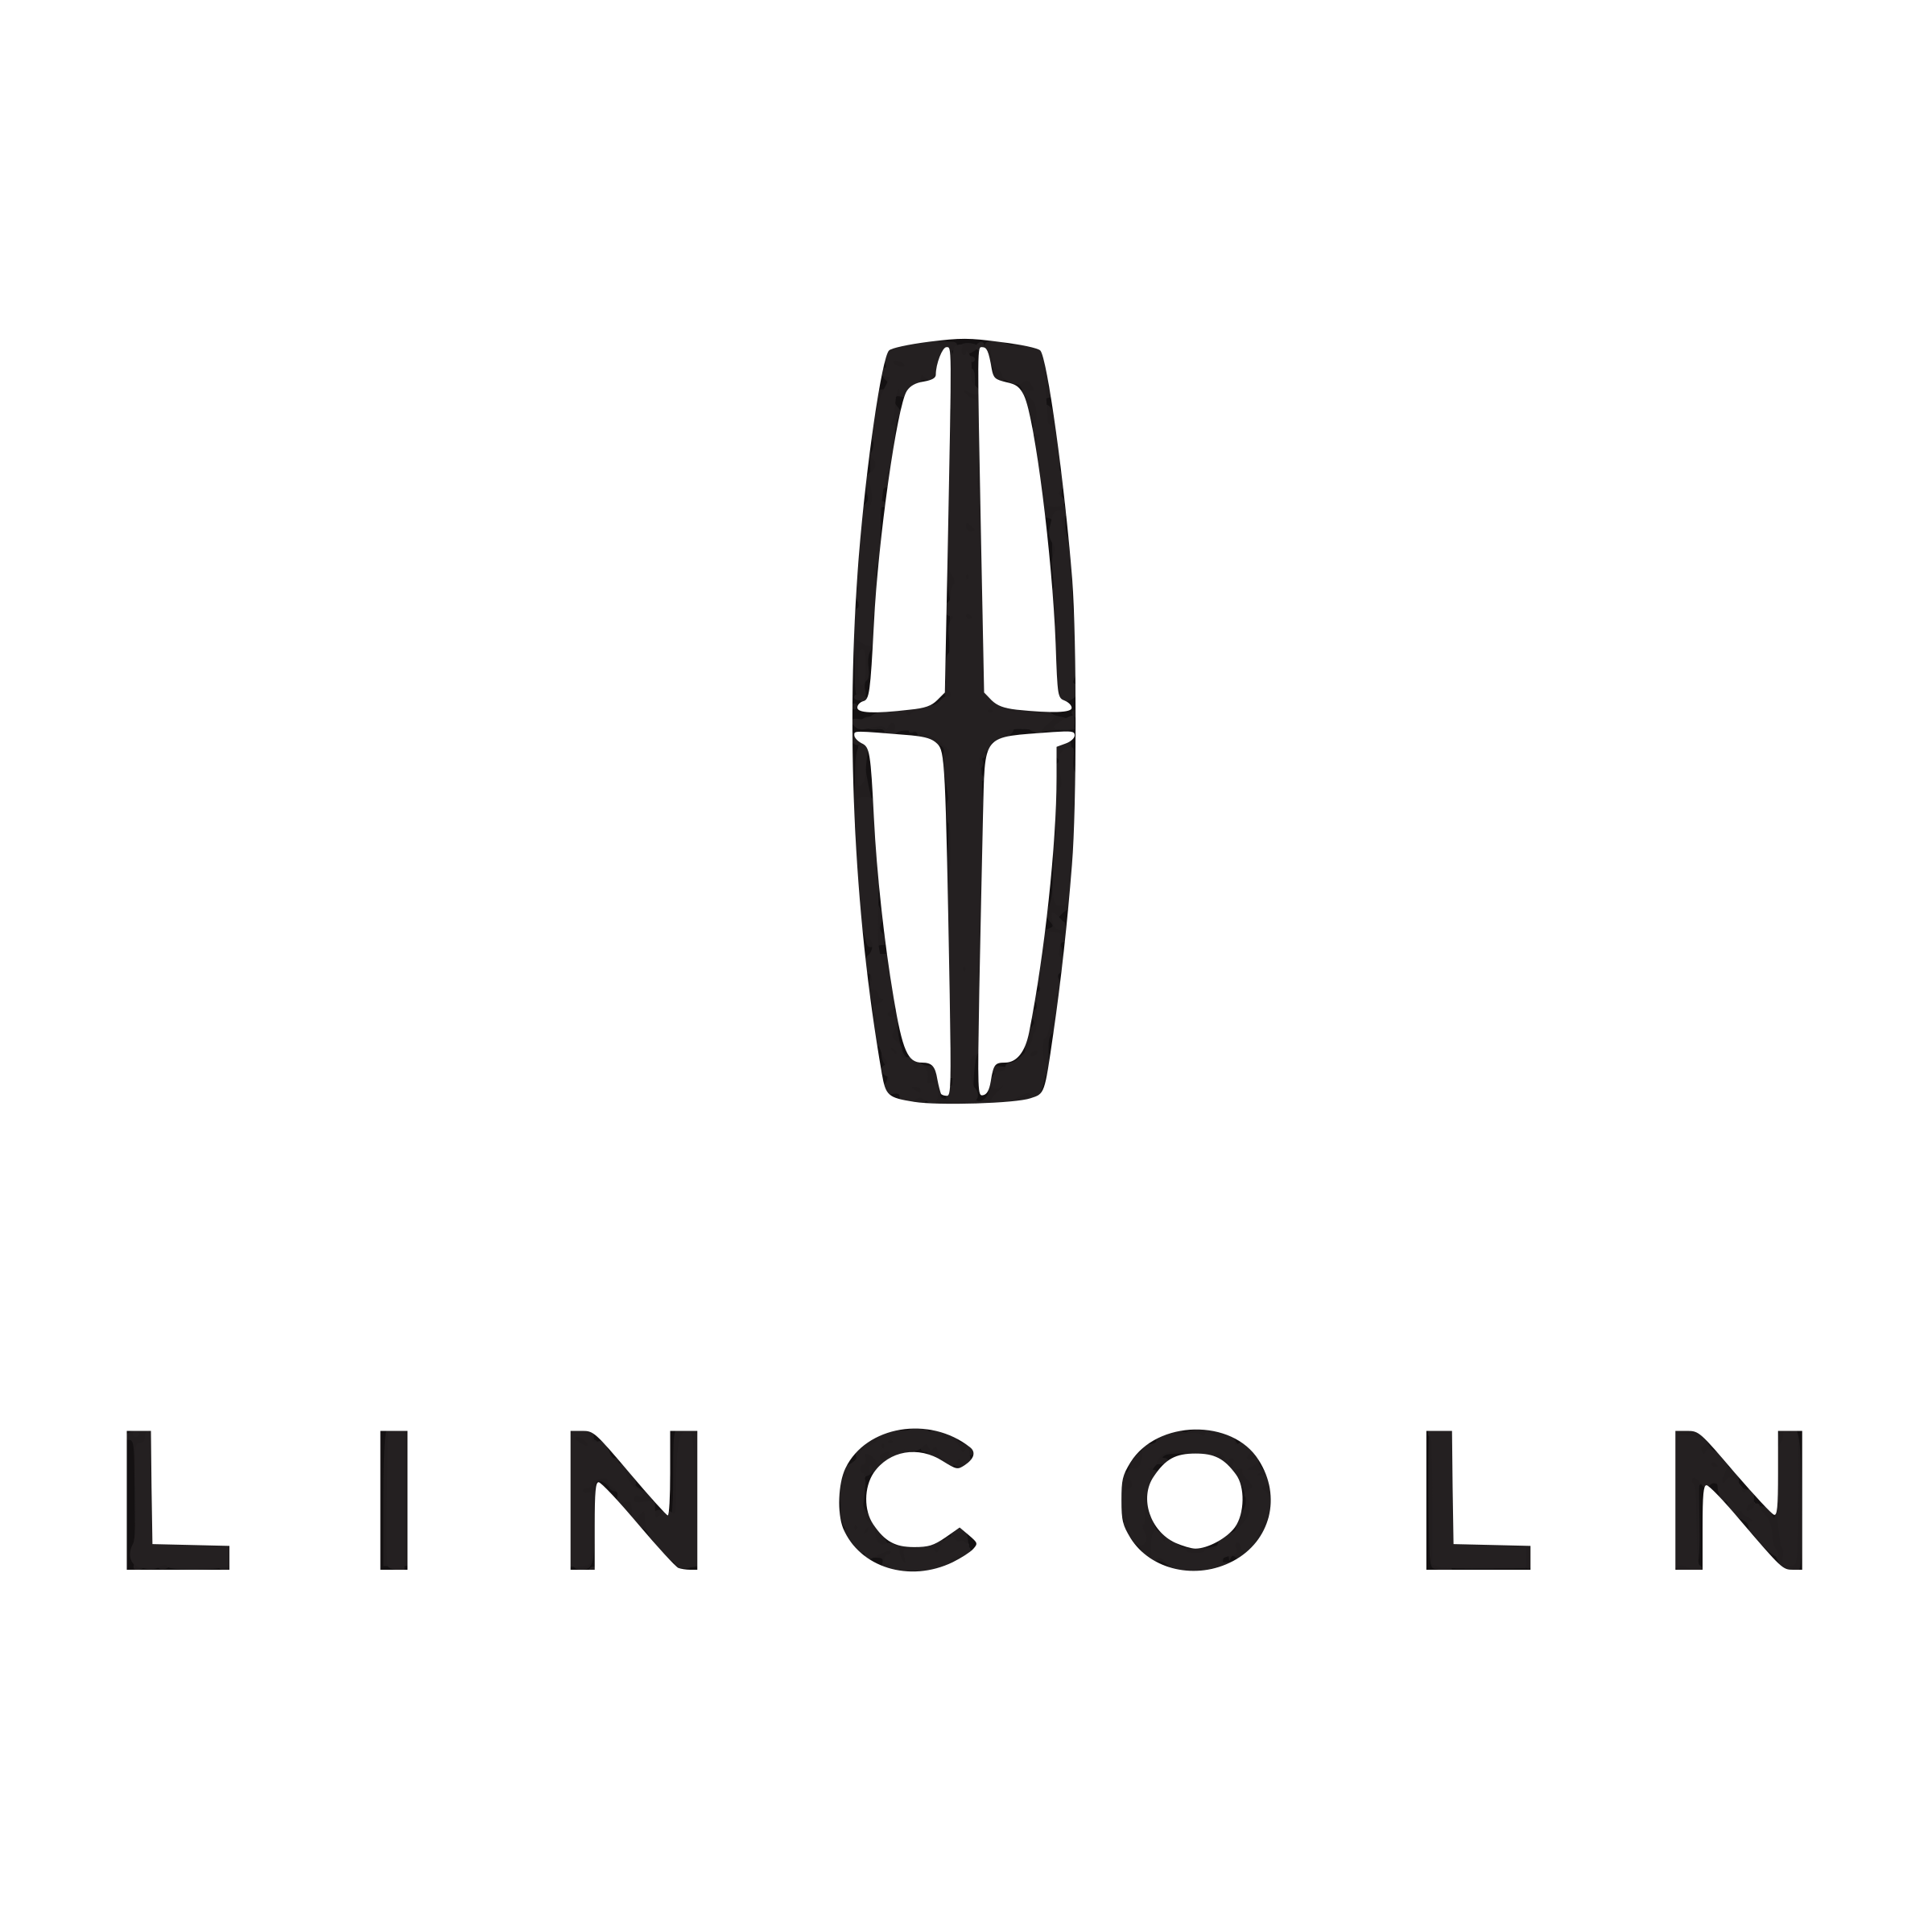 Lincoln Logo - Lincoln Logo PNG Transparent & SVG Vector - Freebie Supply